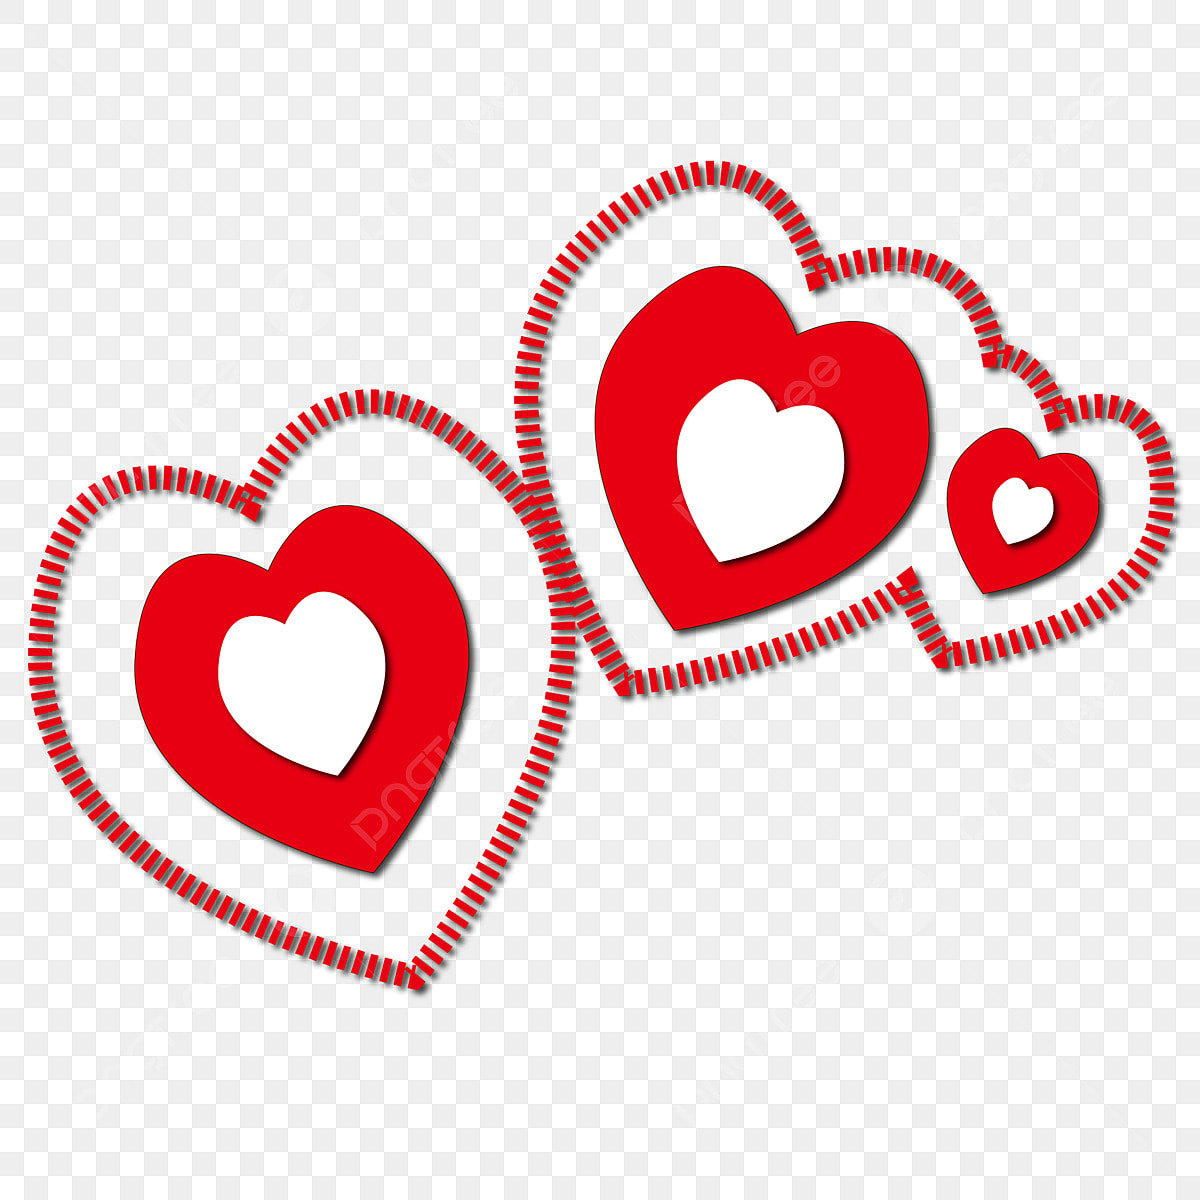 Love Stickers PNG Transparent Image Free Download